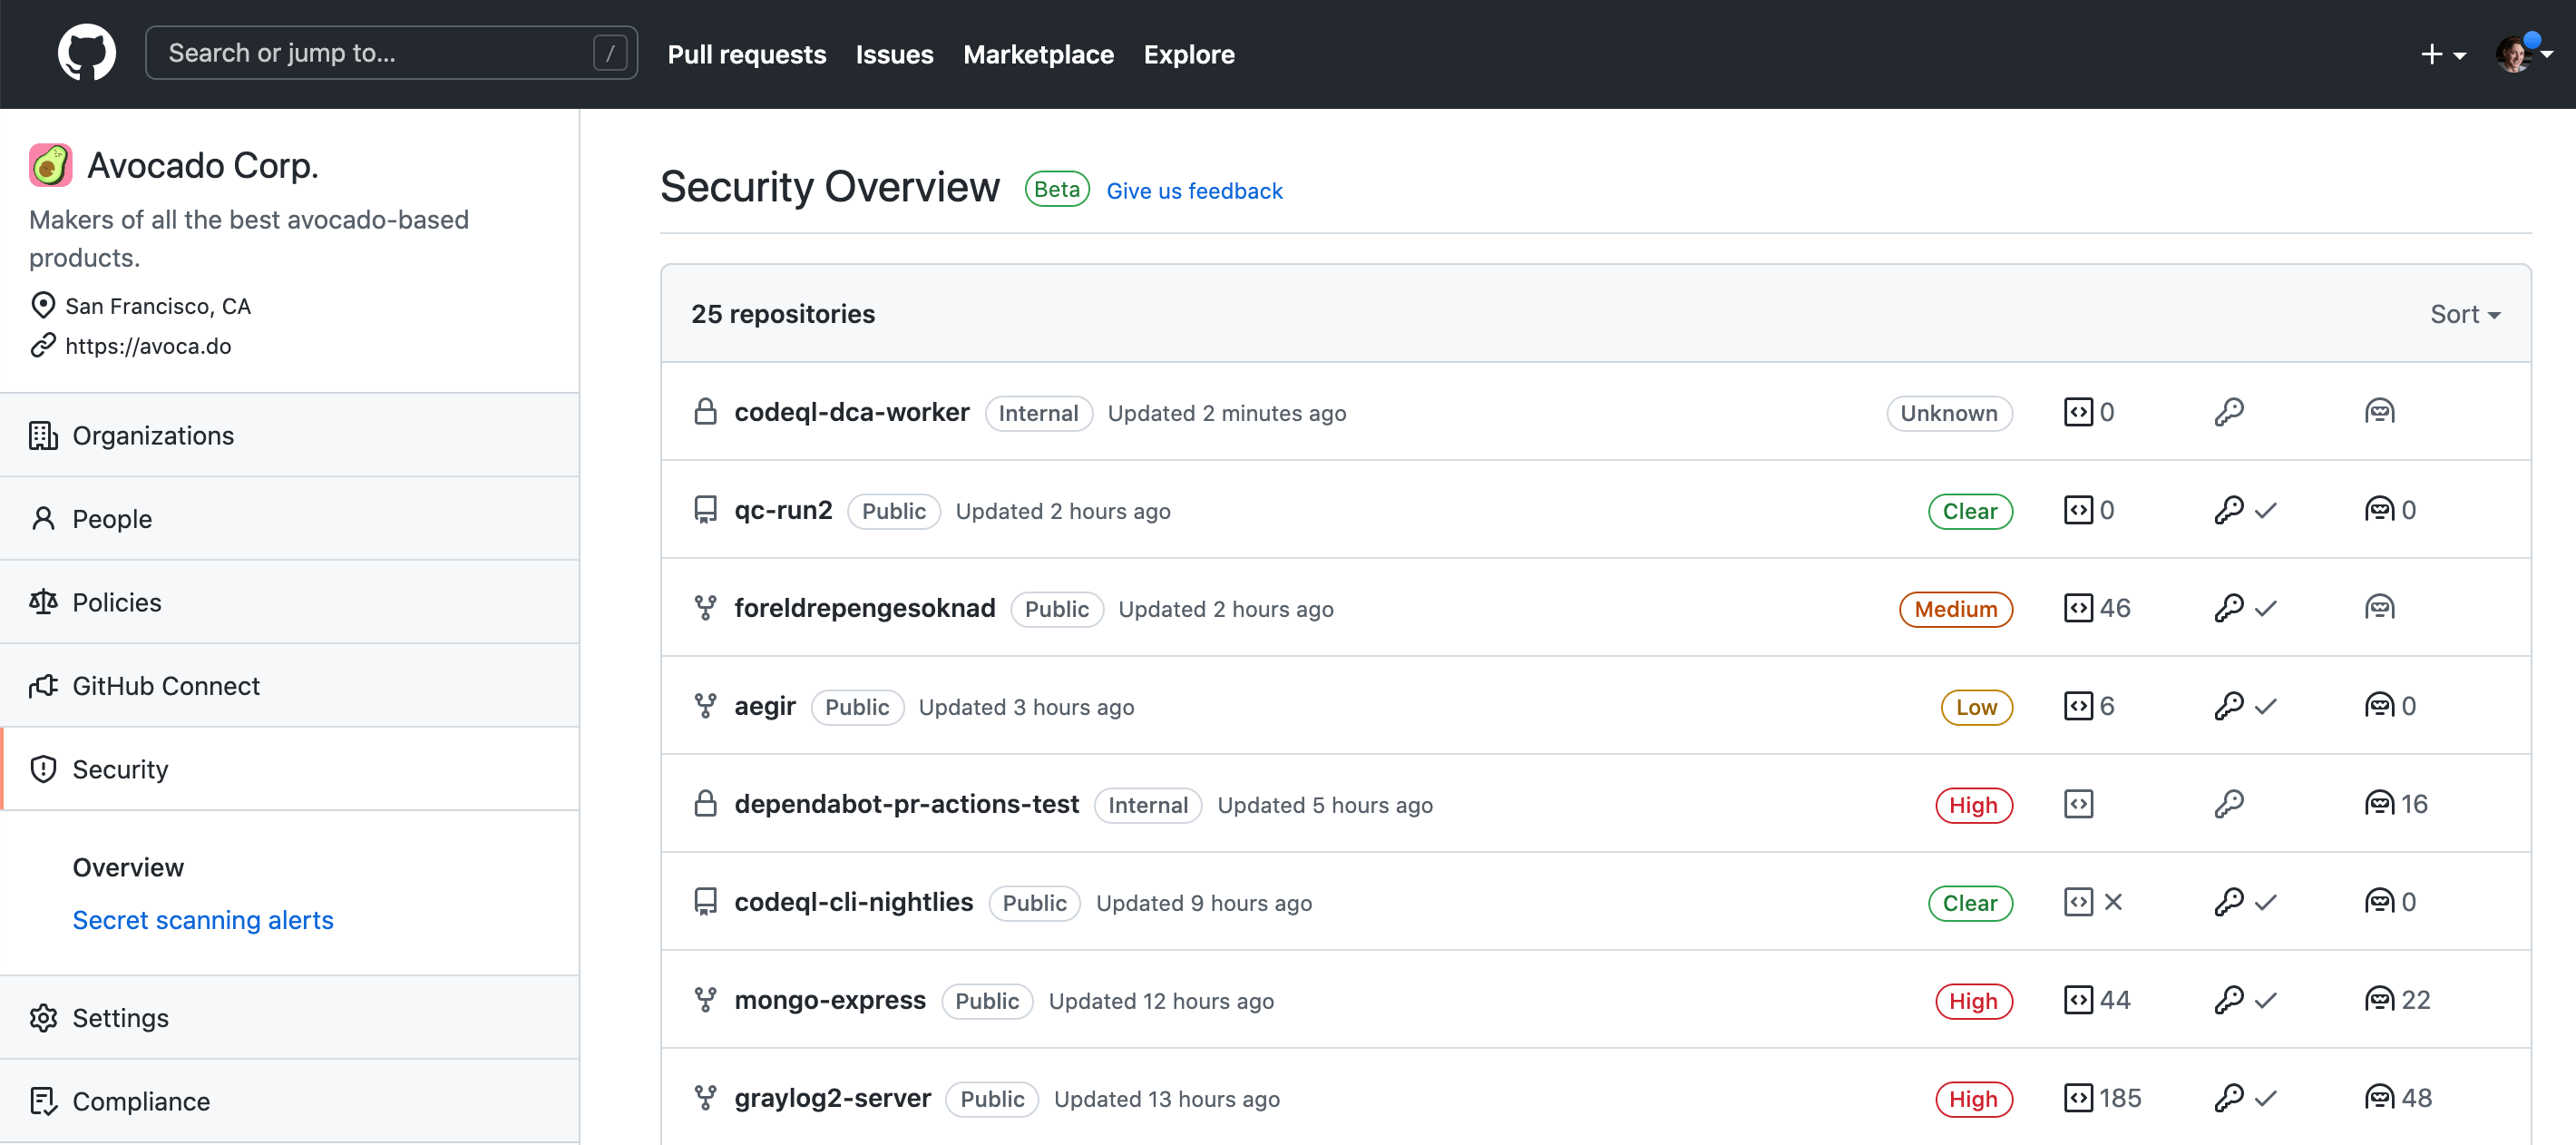 Security overview at the enterprise level